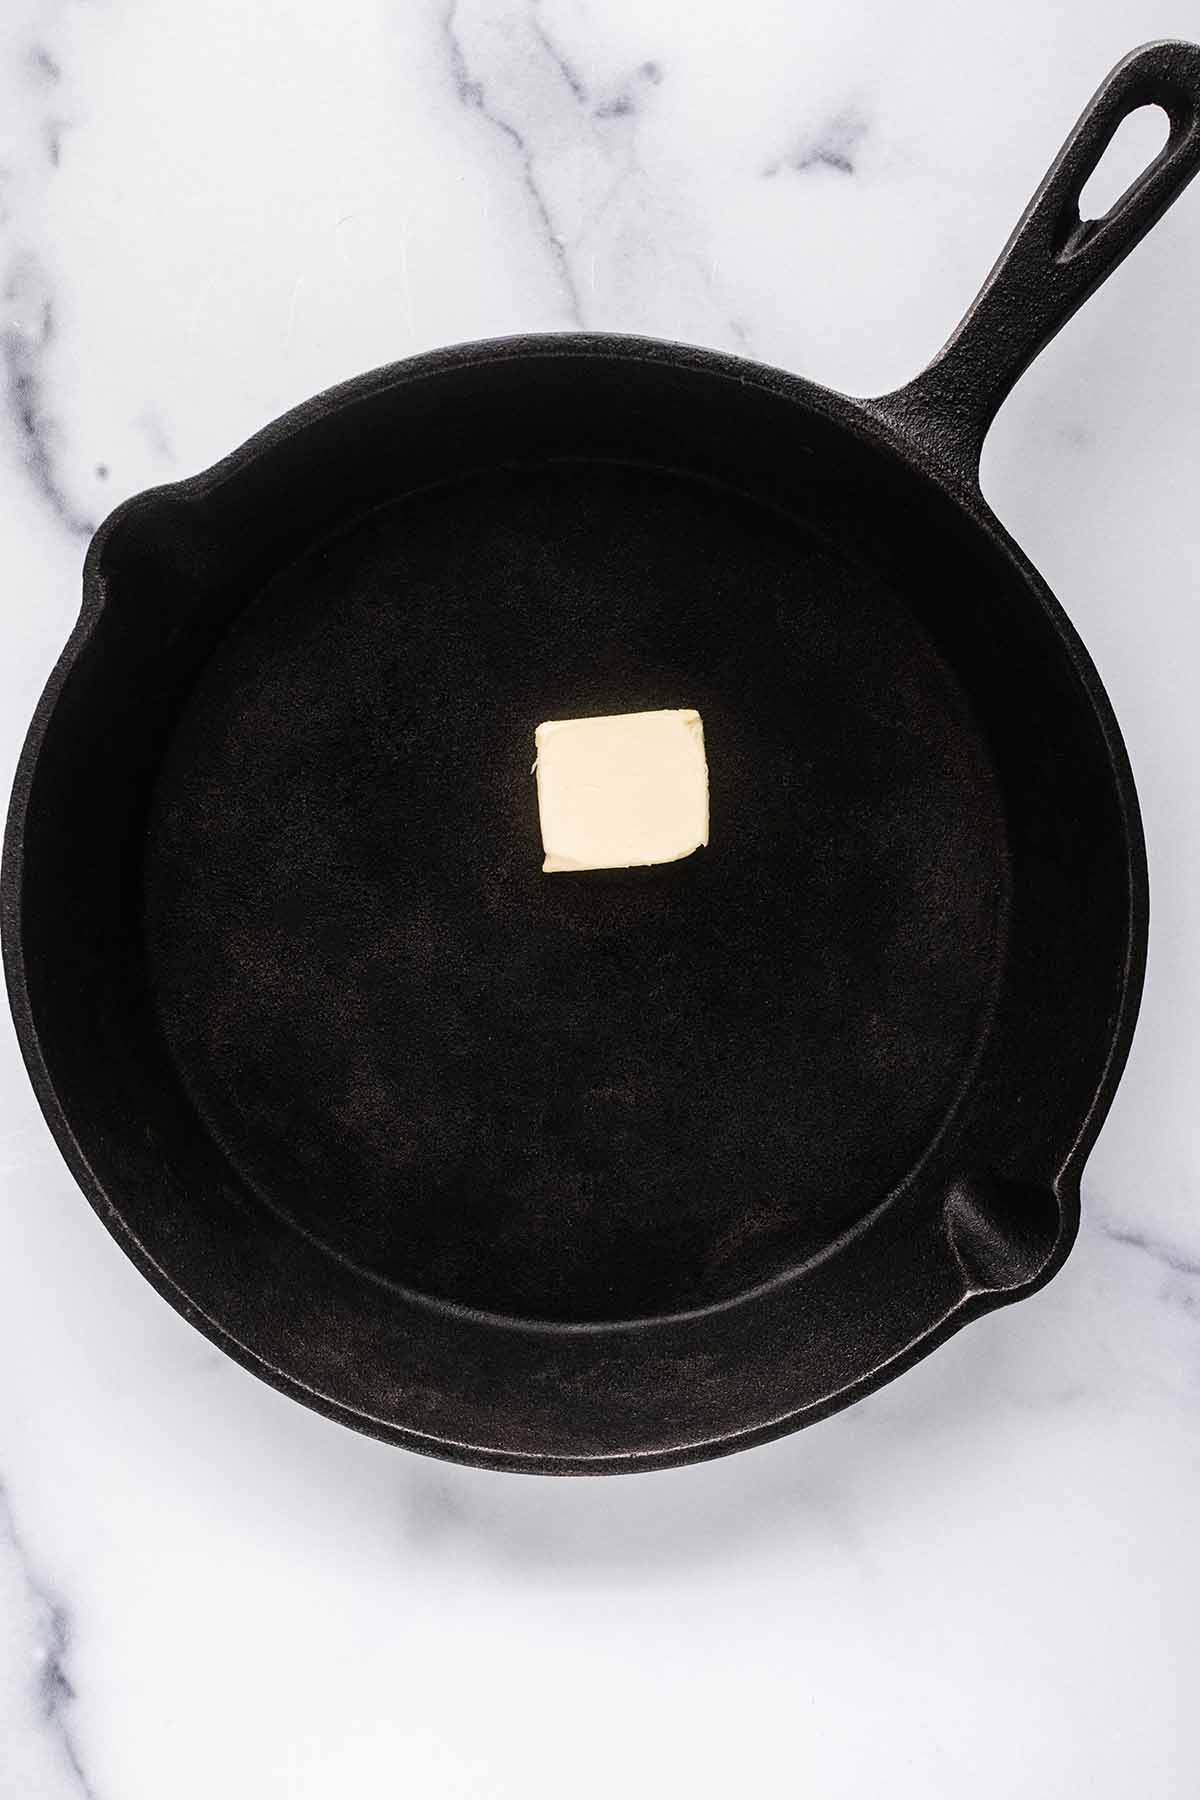 Overhead view of a pat of butter melting in a cast iron skillet.